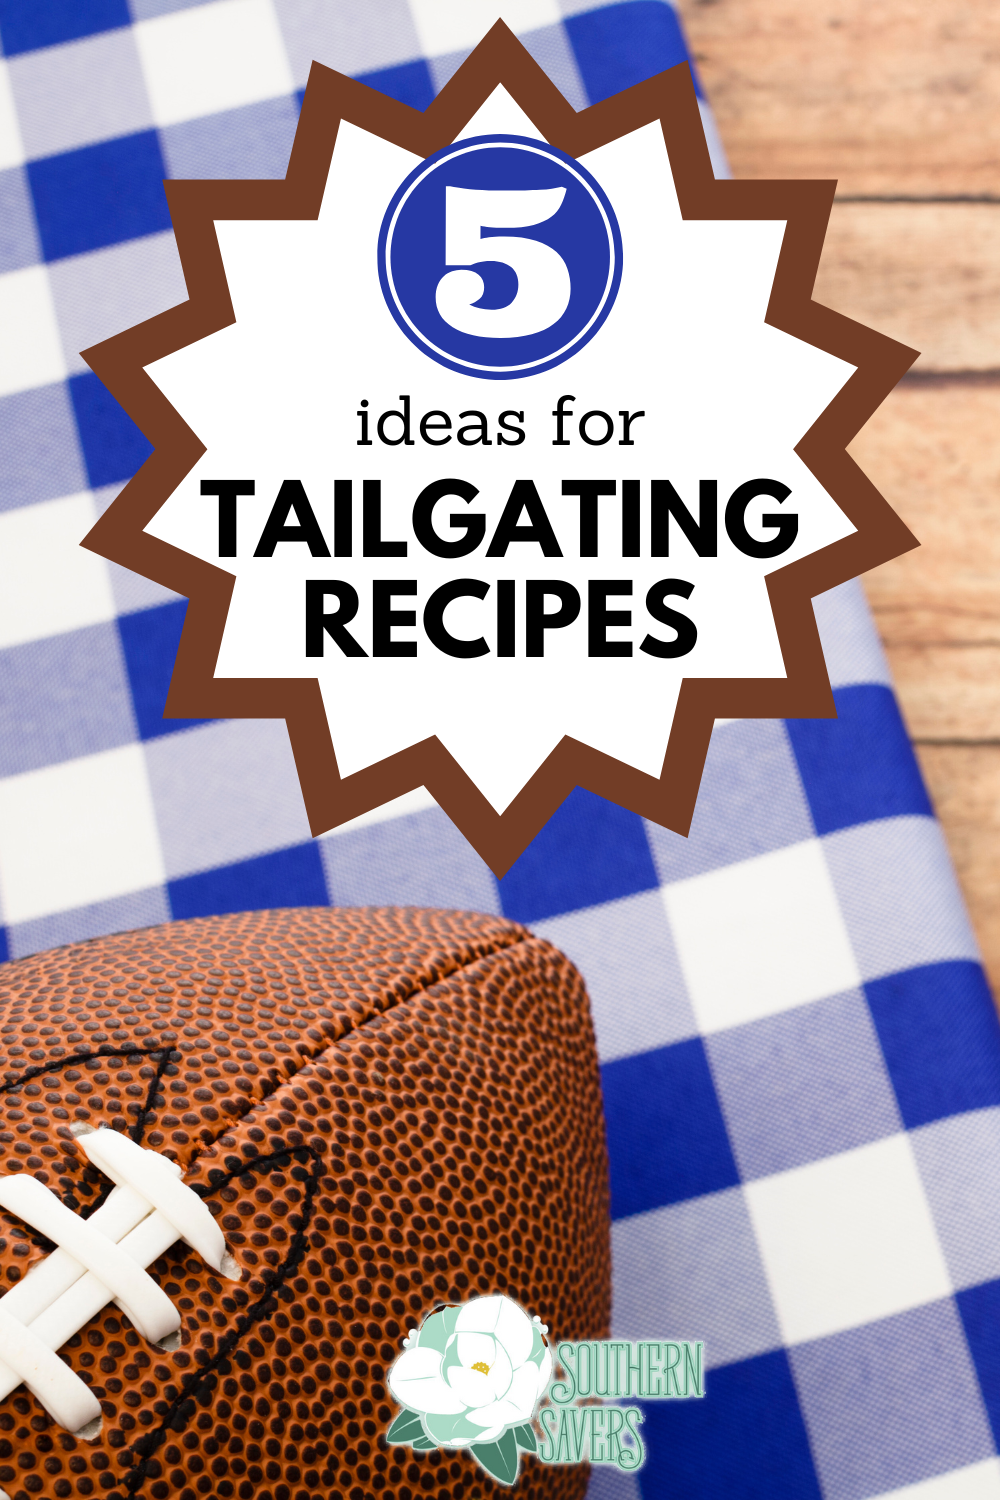 Football season is upon us, which puts many in the mood for eating outside before the big game. Here are 5 ideas for tailgating recipes!